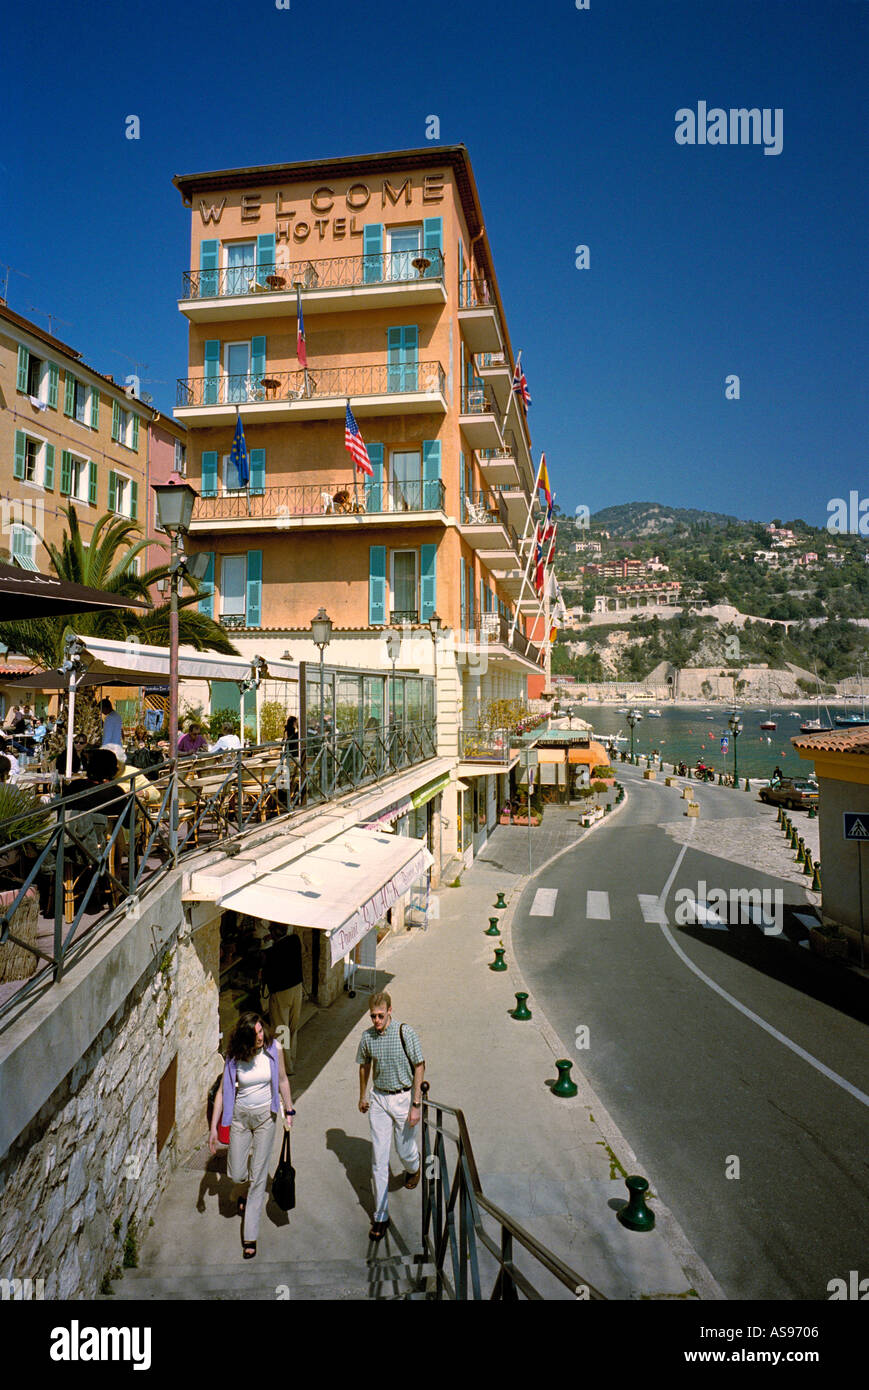 Villefranche sur mer Cote dAzur France- The Welcome Hotel  overlooking the narrow road around the picturesque harbour- near Nice, Stock Photo